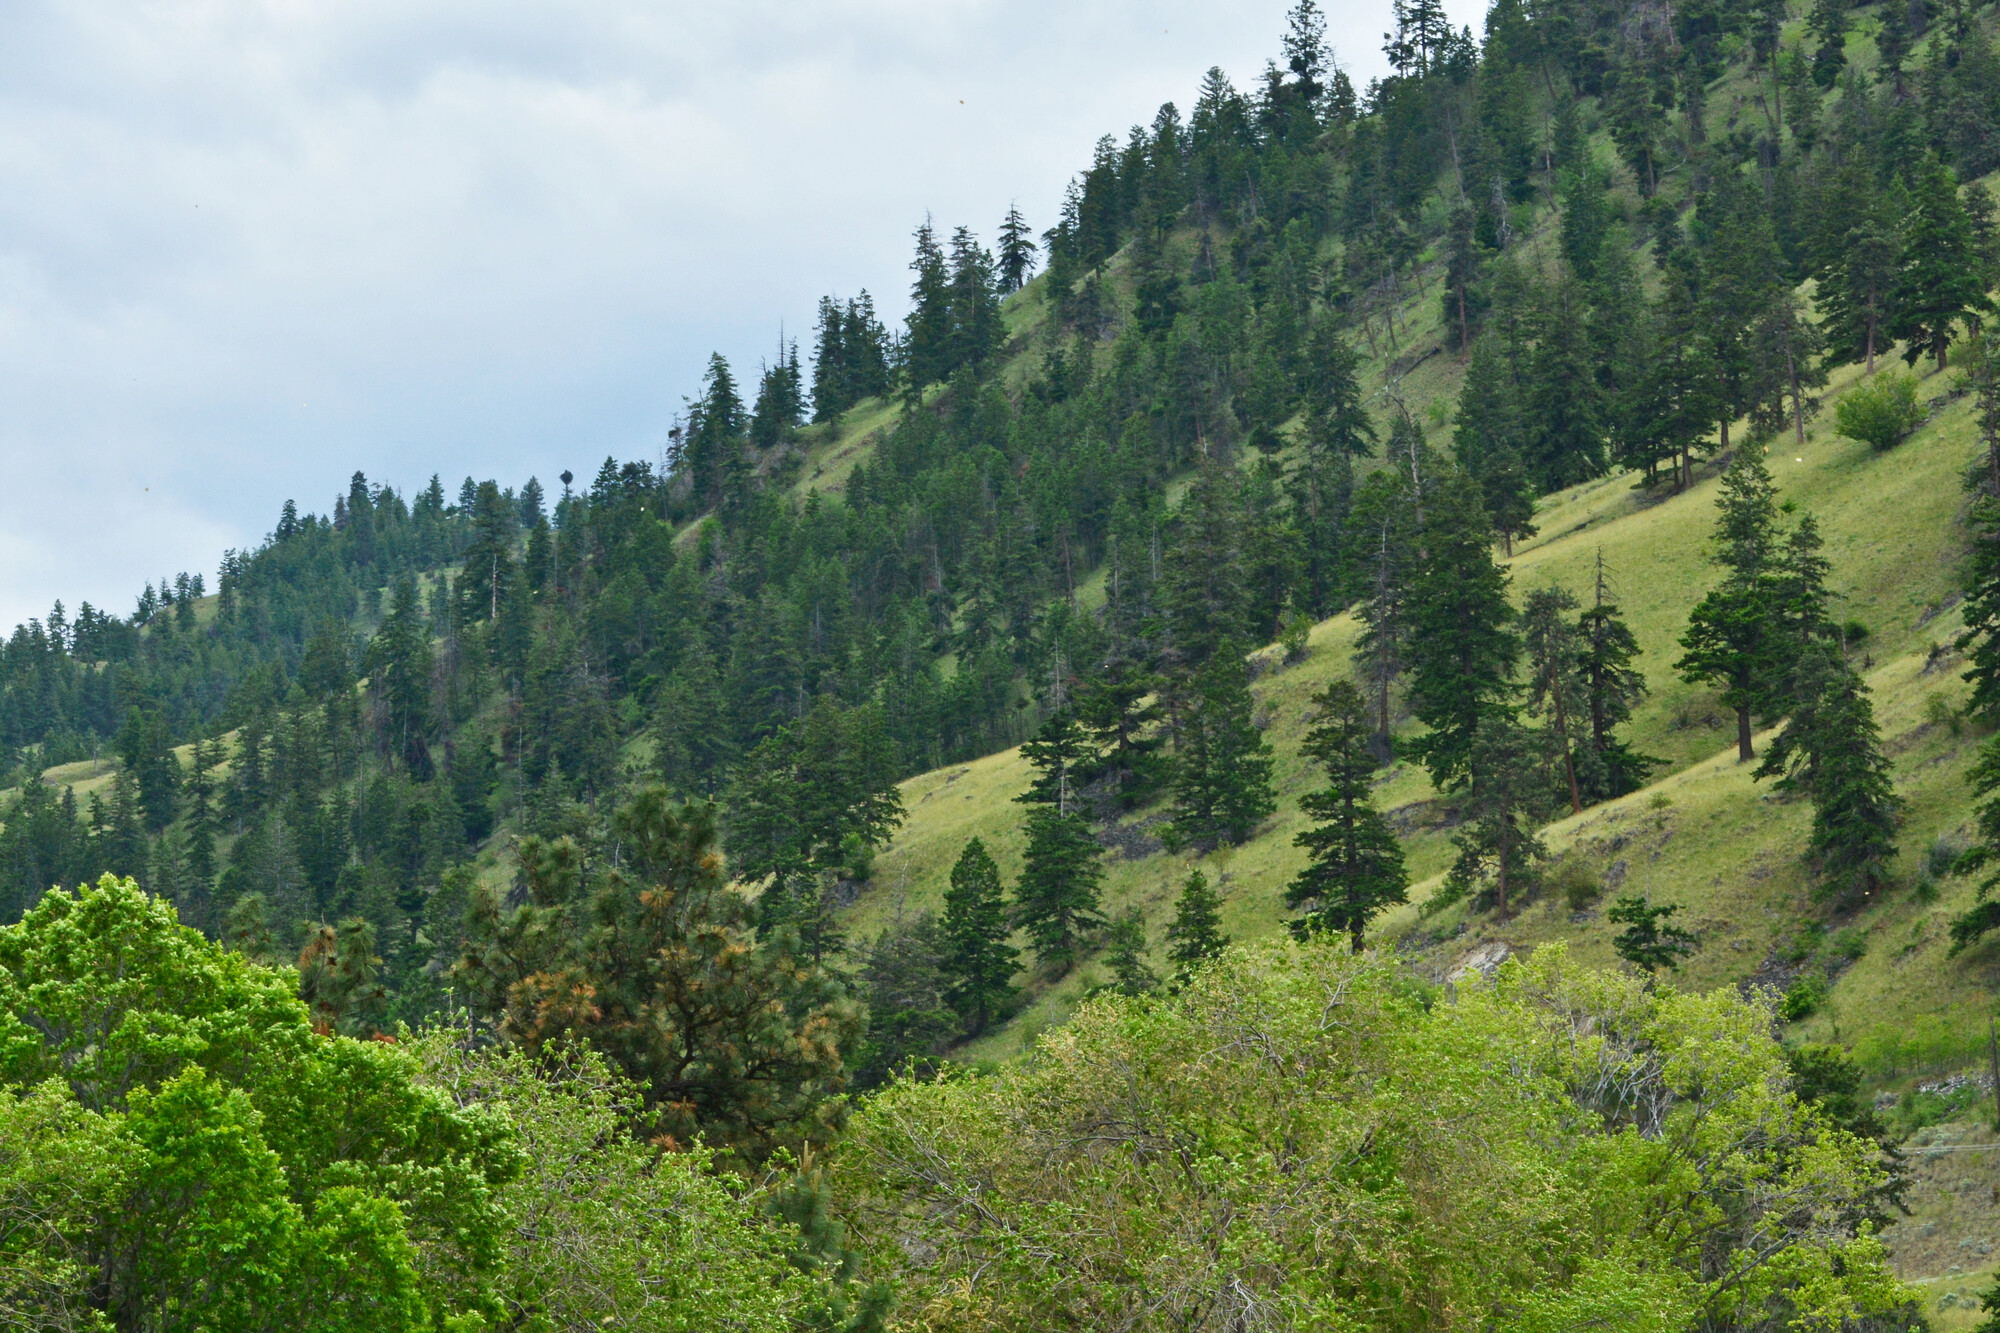 Views of a mountain with large trees growing on the slopes